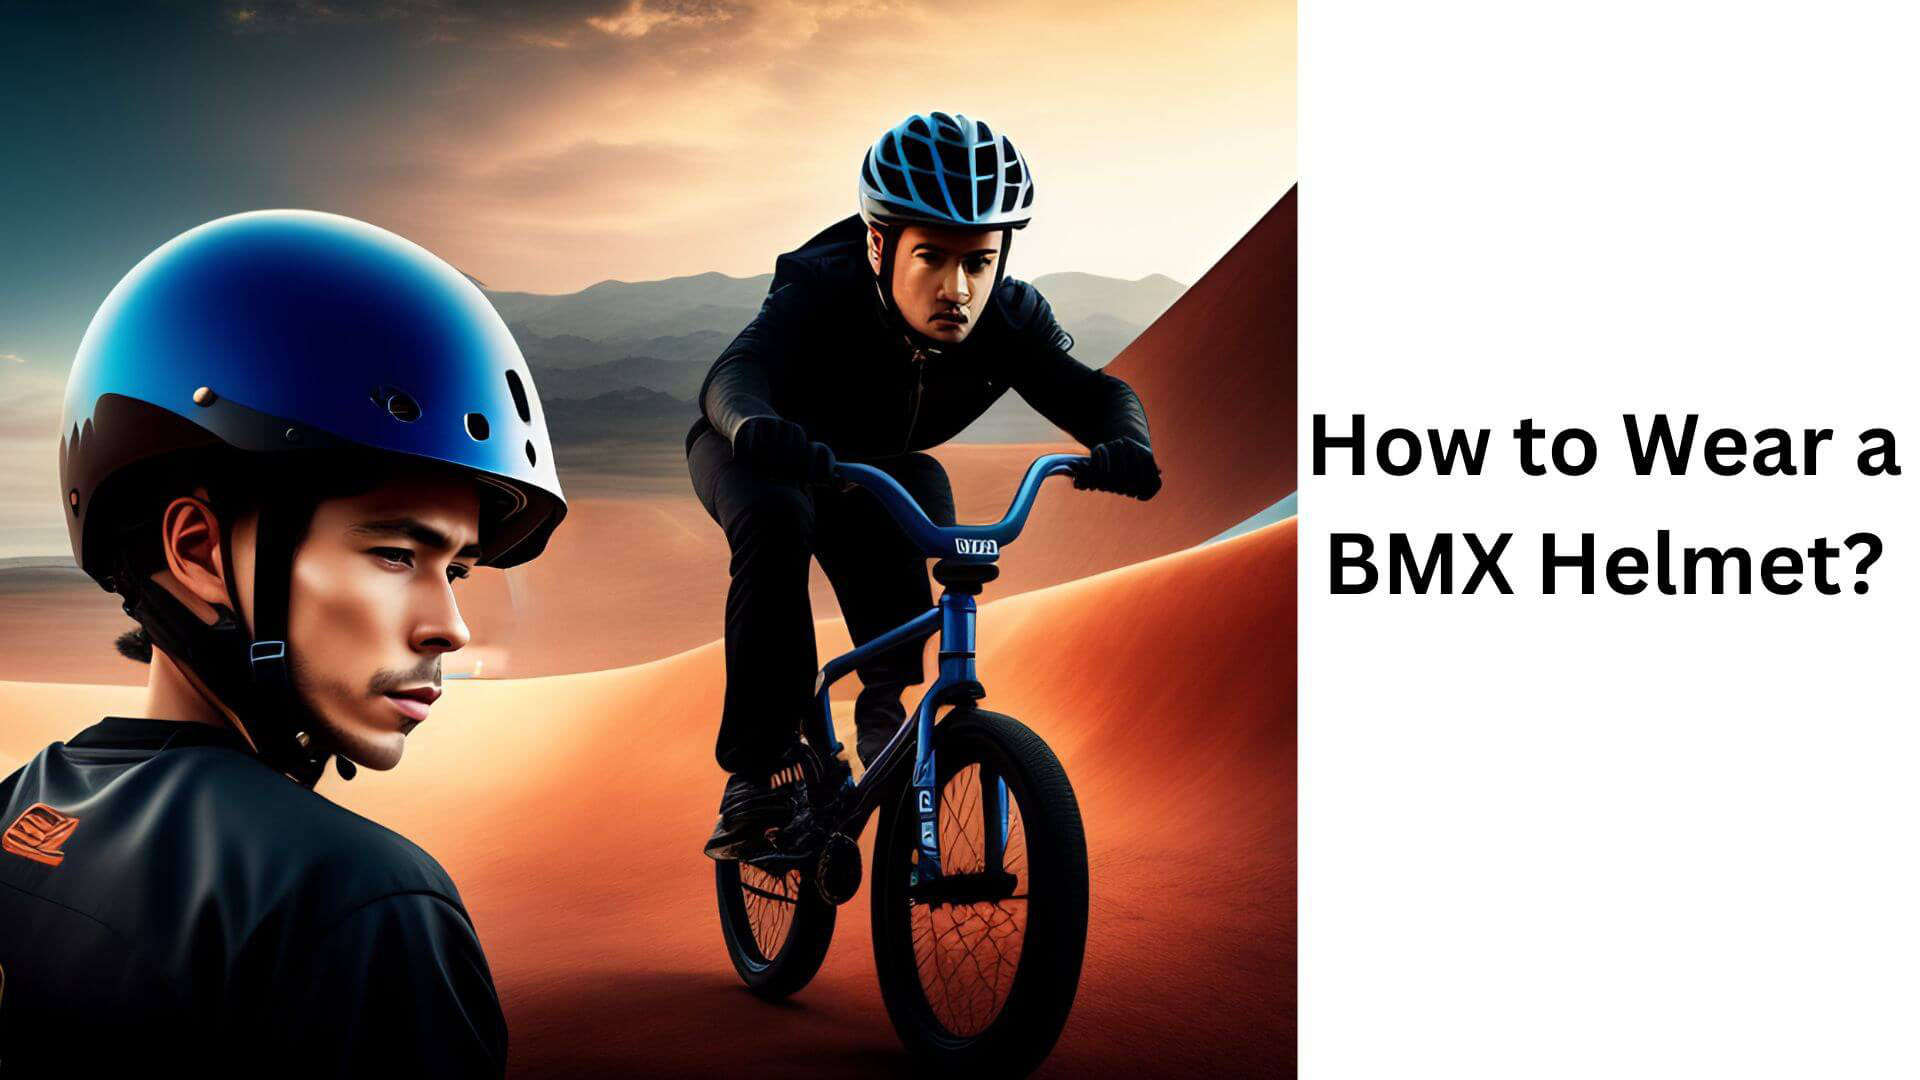 How to Wear a BMX Helmet and Other Safety Tips